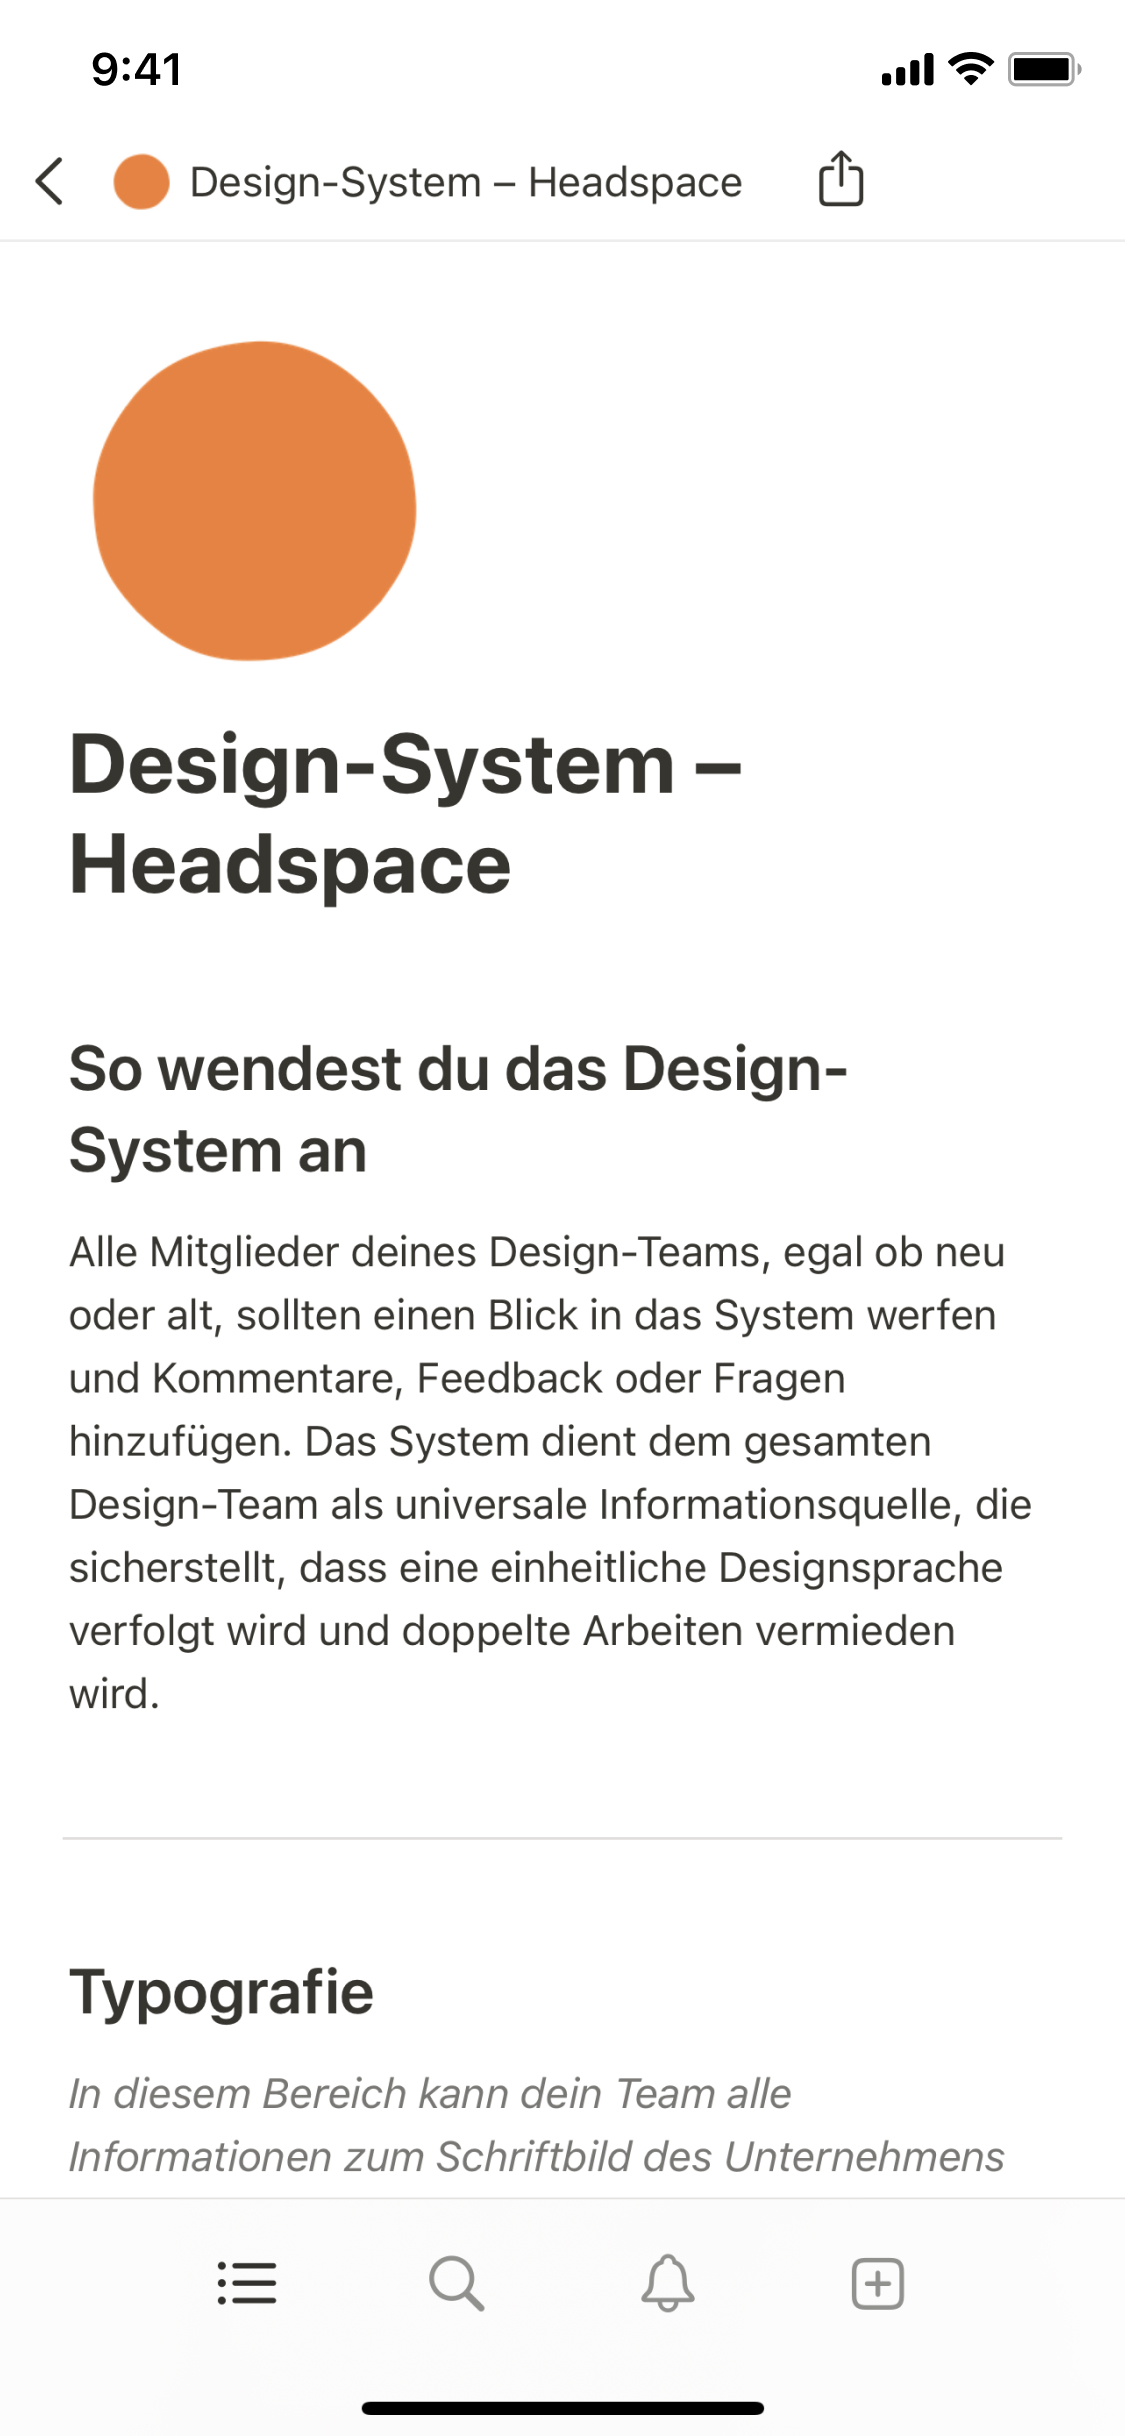 The mobile image for Headspace's design system template